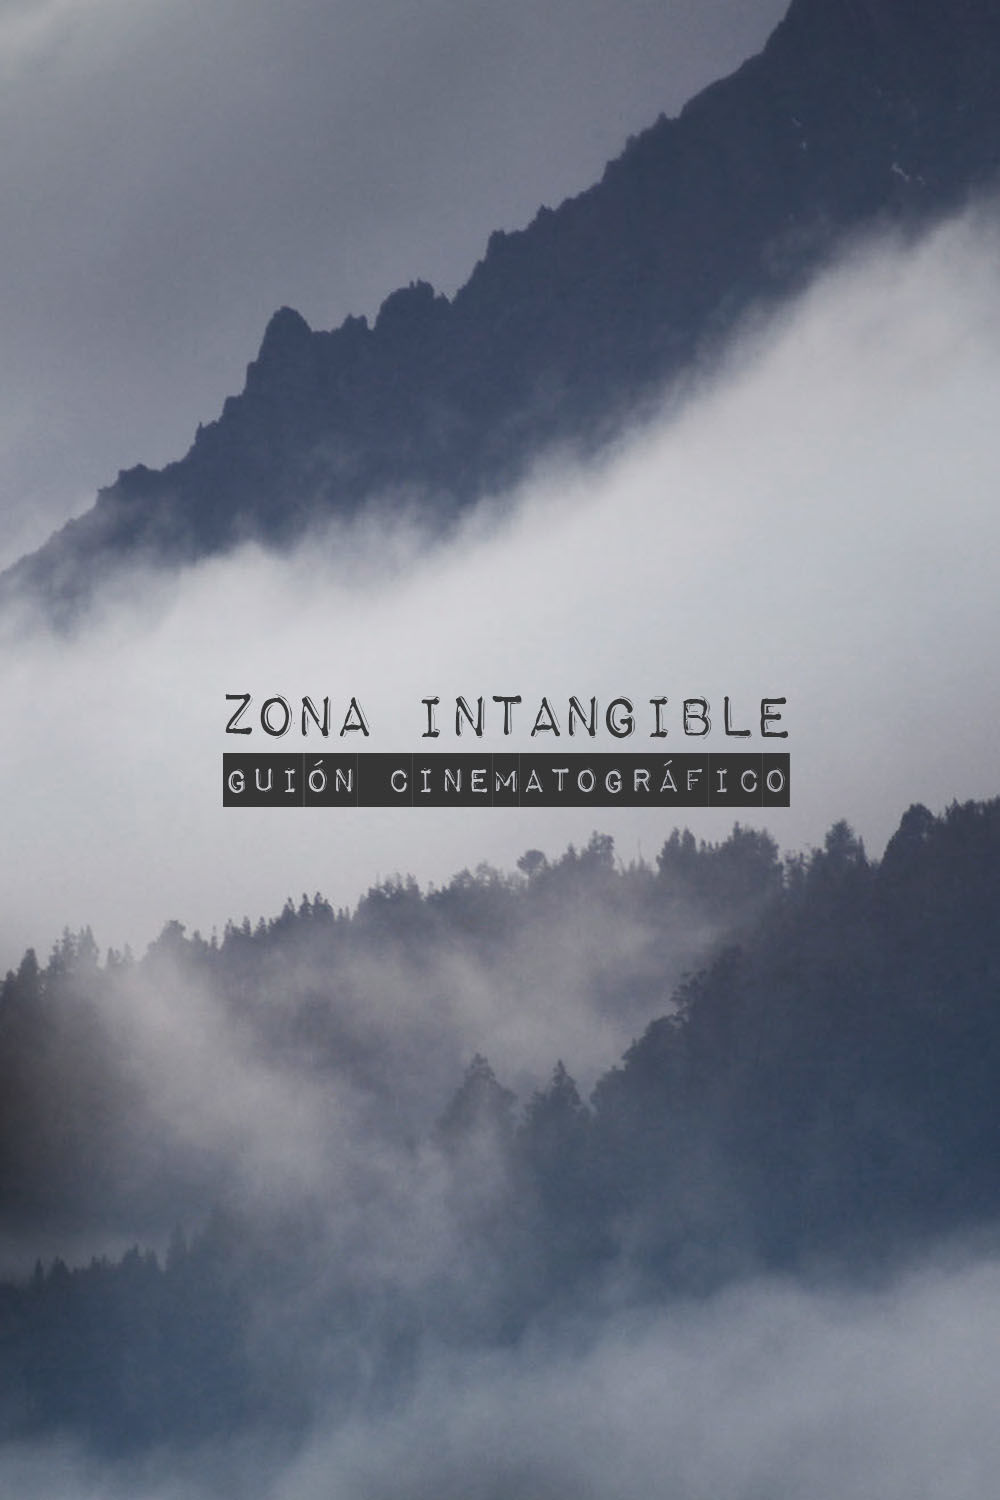 INTANGIBLE ZONE